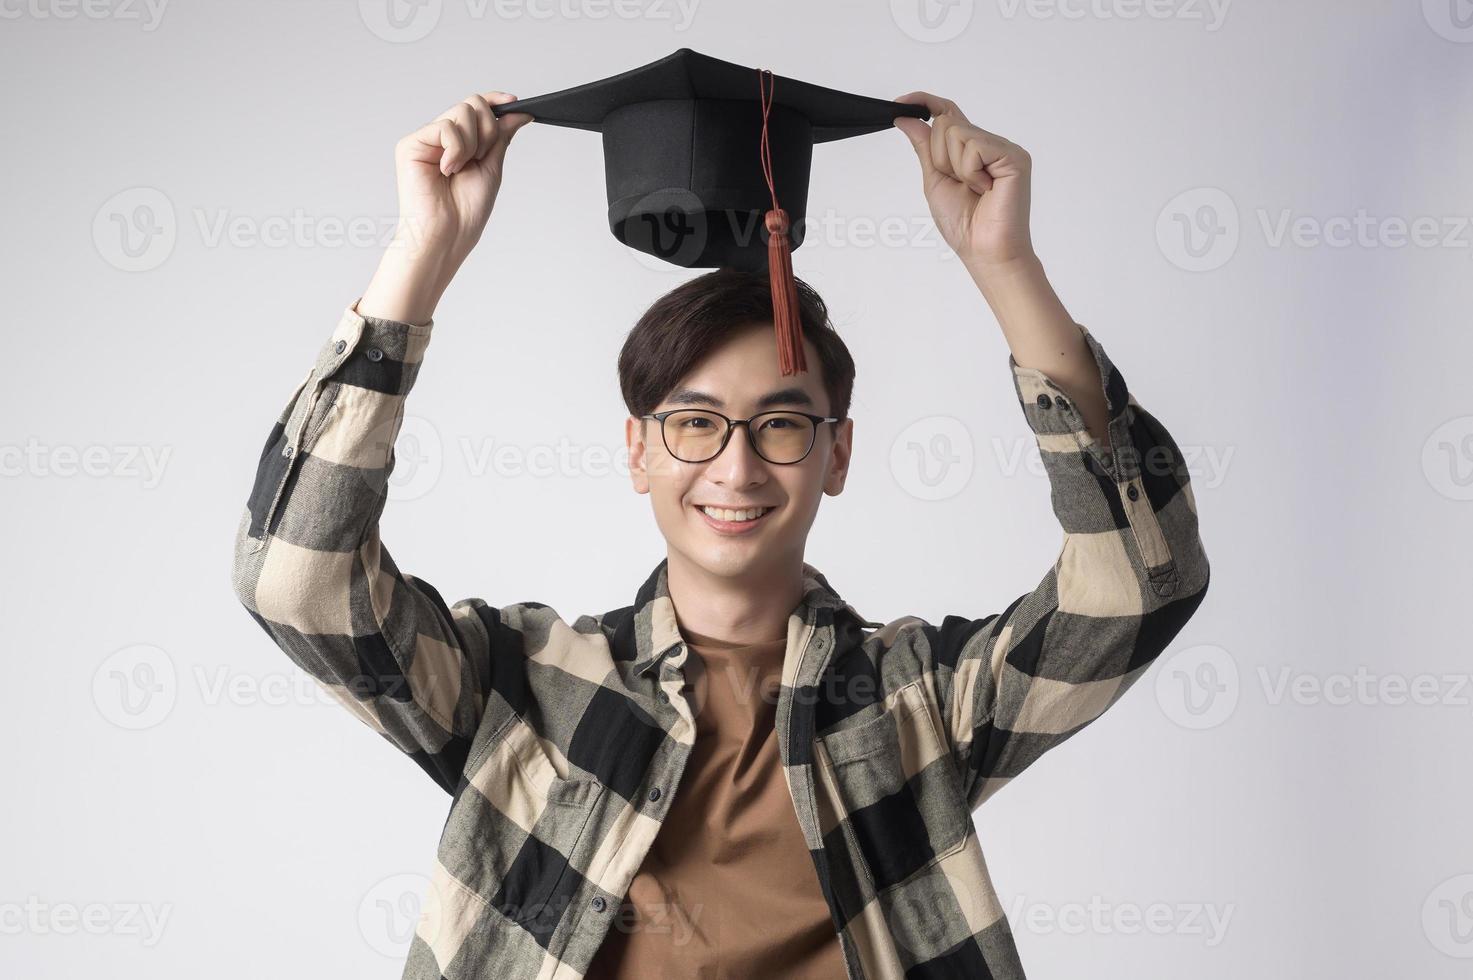 Young smiling man holding graduation hat, education and university concept photo